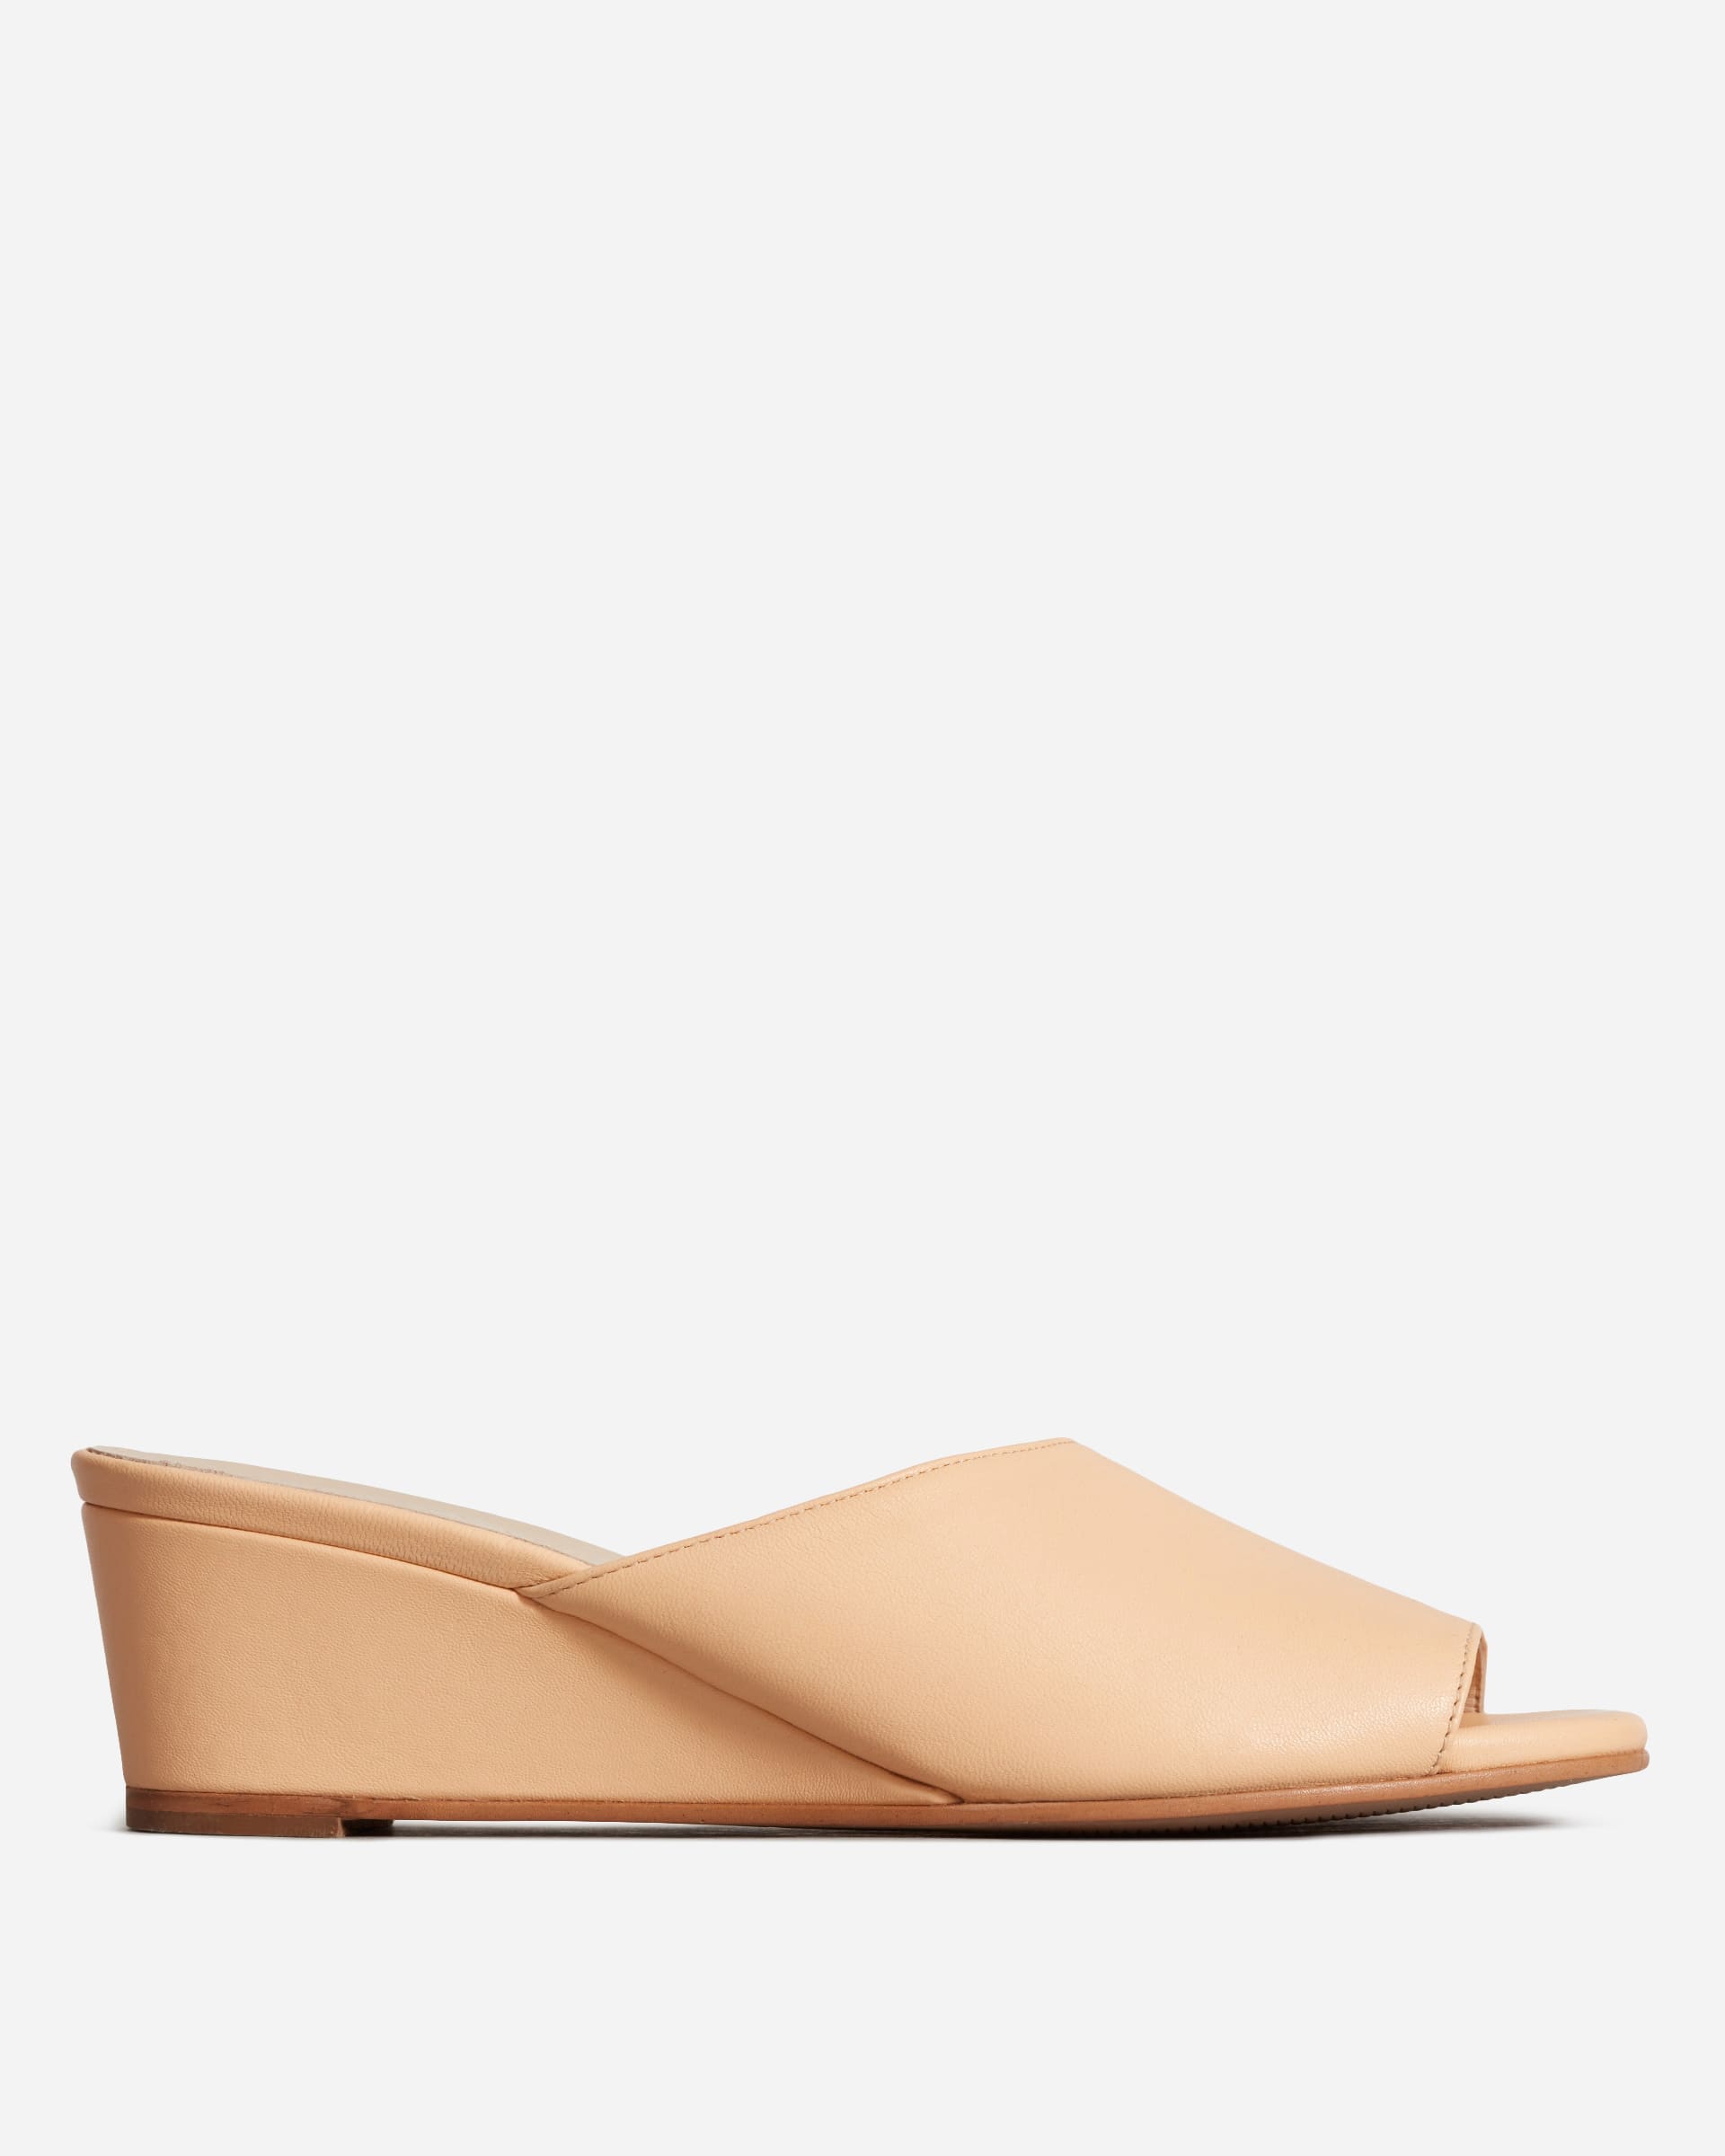 The Wedge Apricot – Everlane